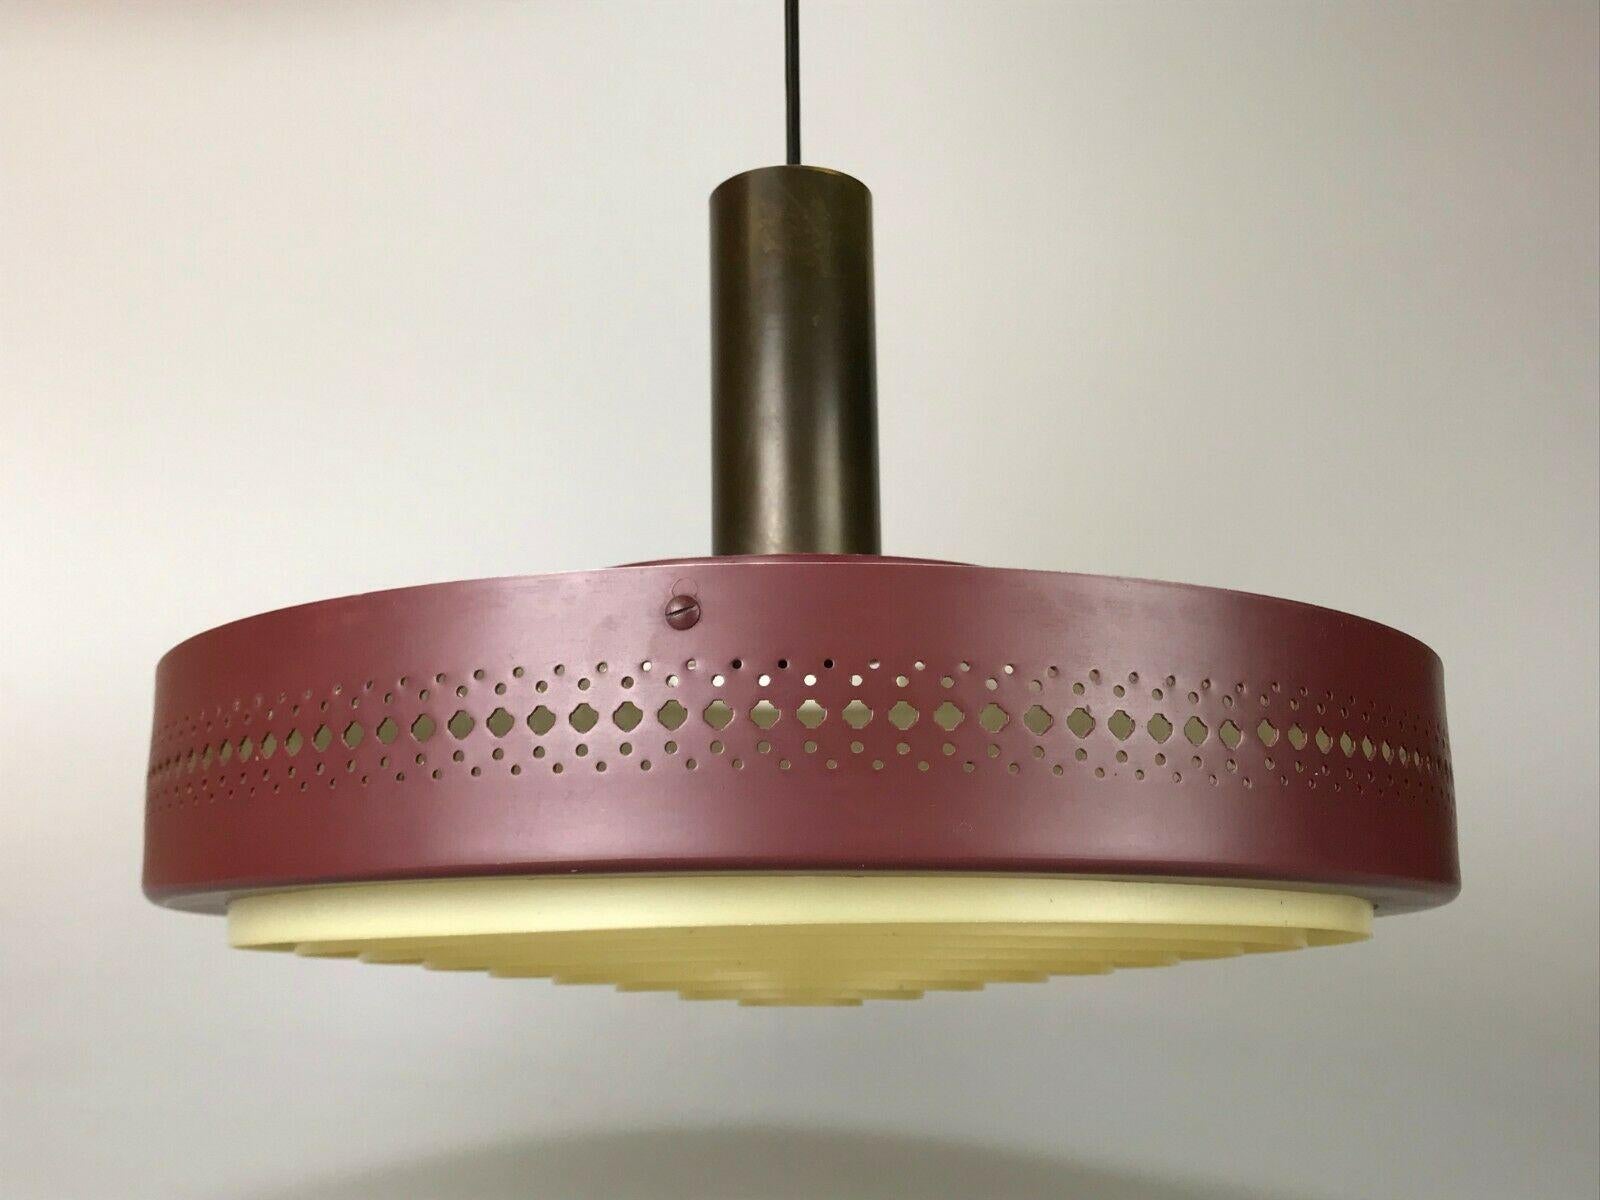 60s 70s Lamp light ceiling lamp sheet metal Space Age Danish Denmark design.

Object: ceiling lamp

Manufacturer: Fog & Morup

Condition: good

Age: around 1960-1970

Dimensions:

Diameter = 38cm
Hanging height = 61cm

Other